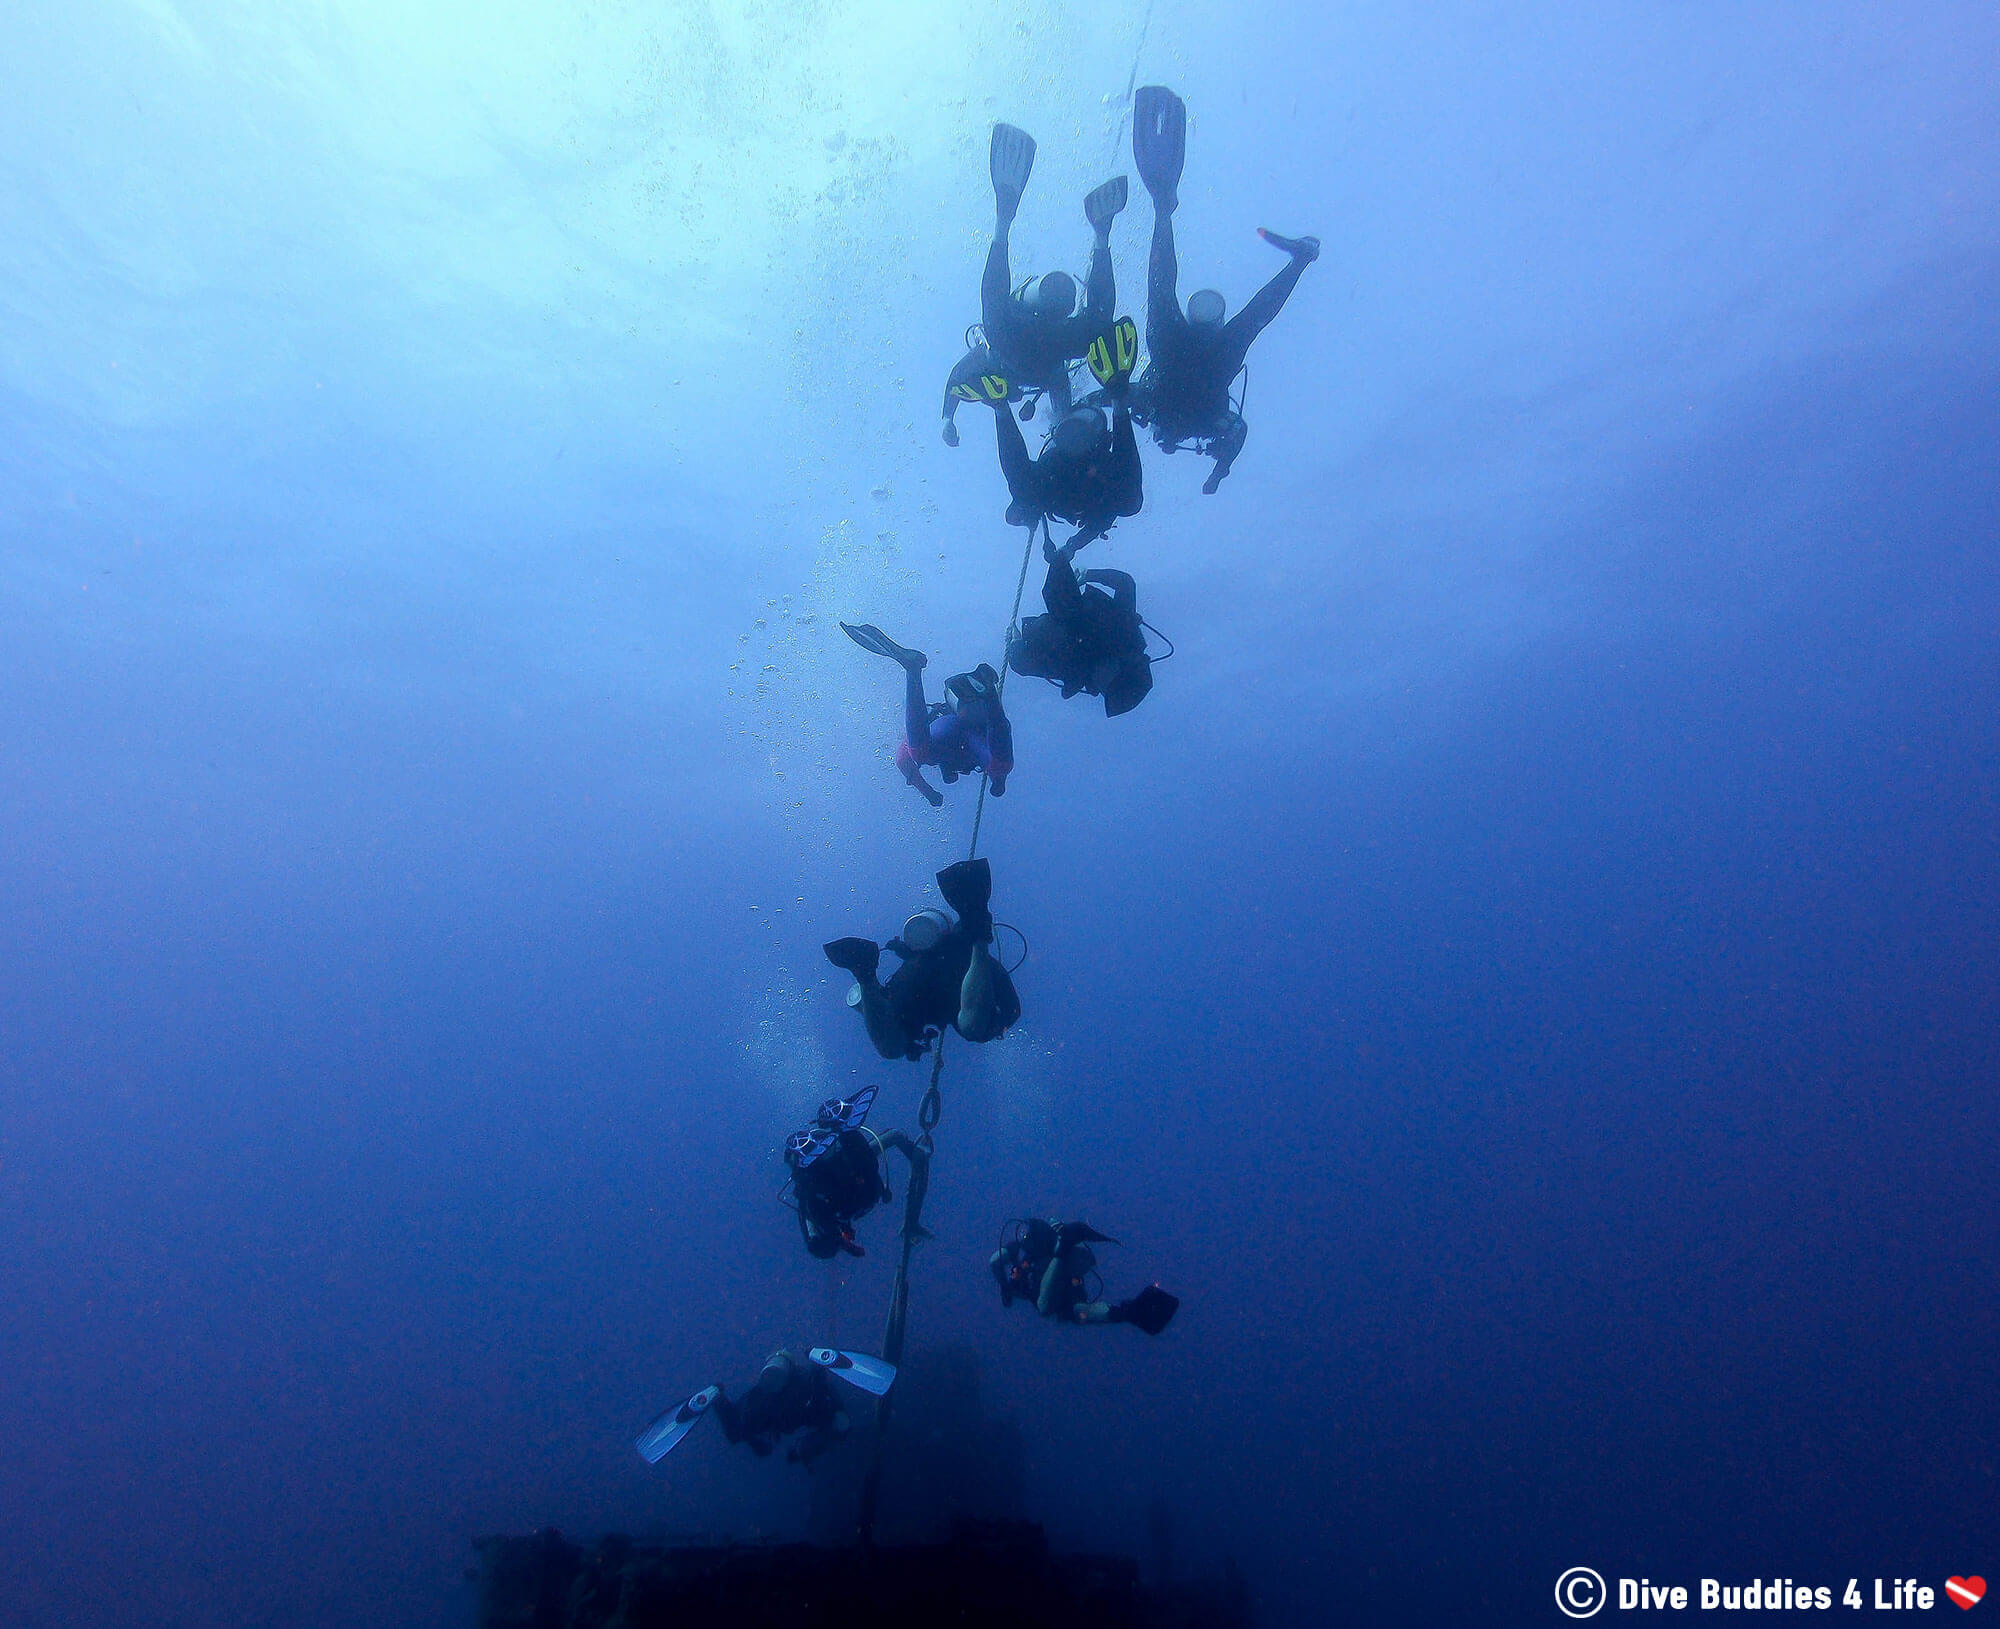 Divers Hanging on in the Current Diving The Duane Florida Key Shipwreck in Key Largo, USA